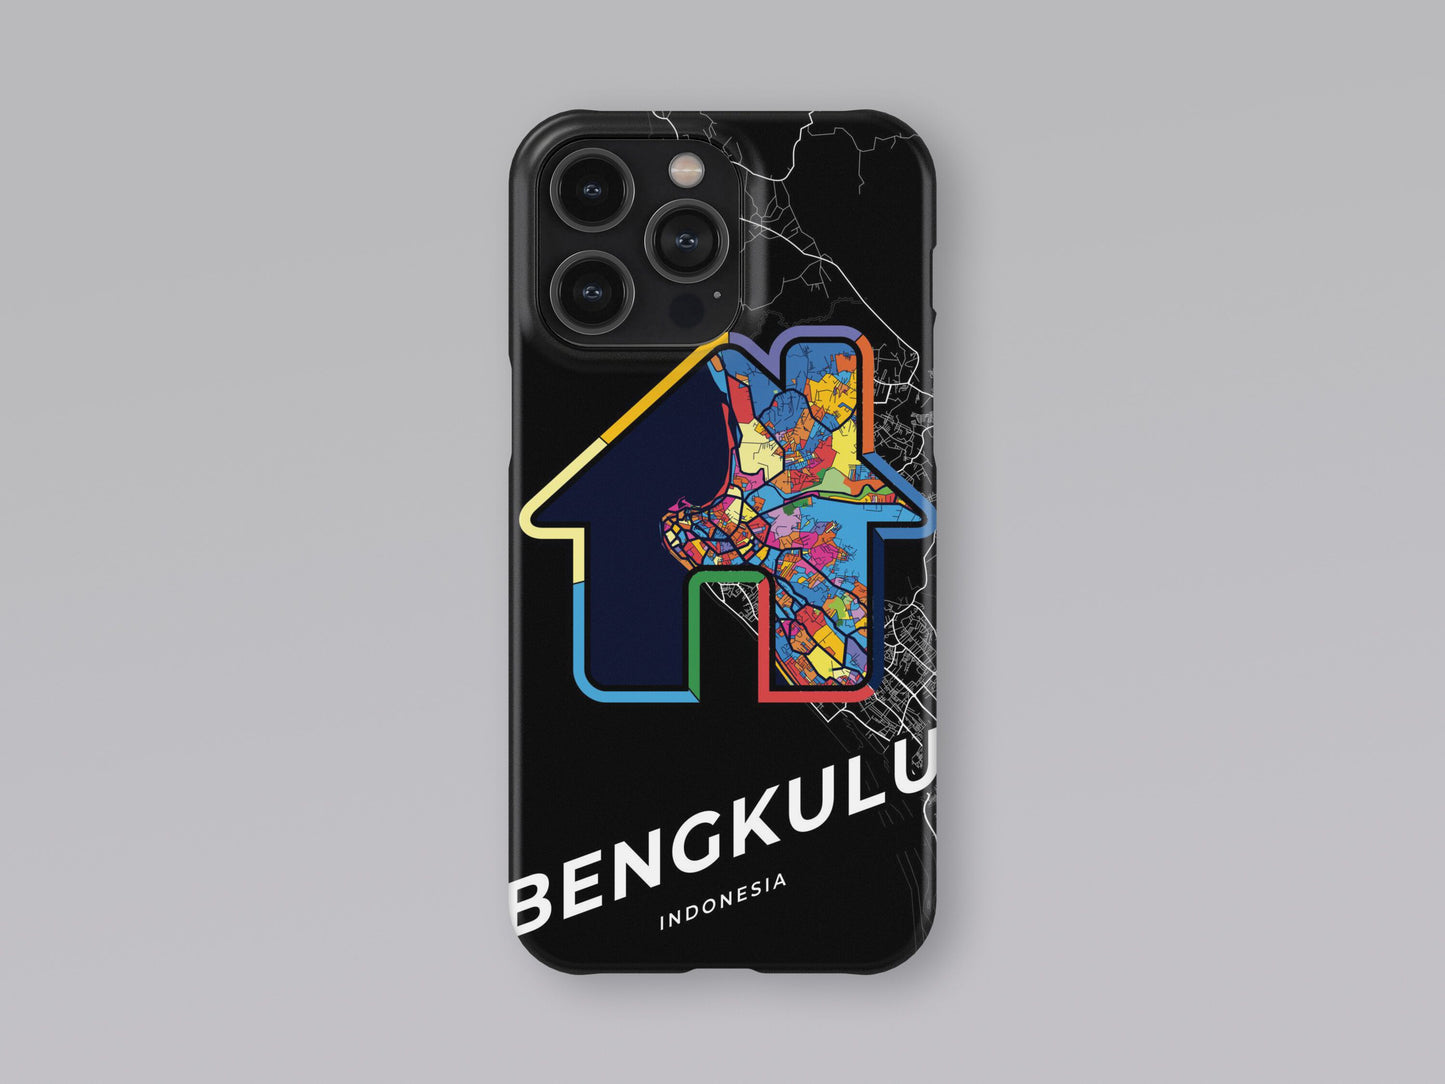 Bengkulu Indonesia slim phone case with colorful icon. Birthday, wedding or housewarming gift. Couple match cases. 3